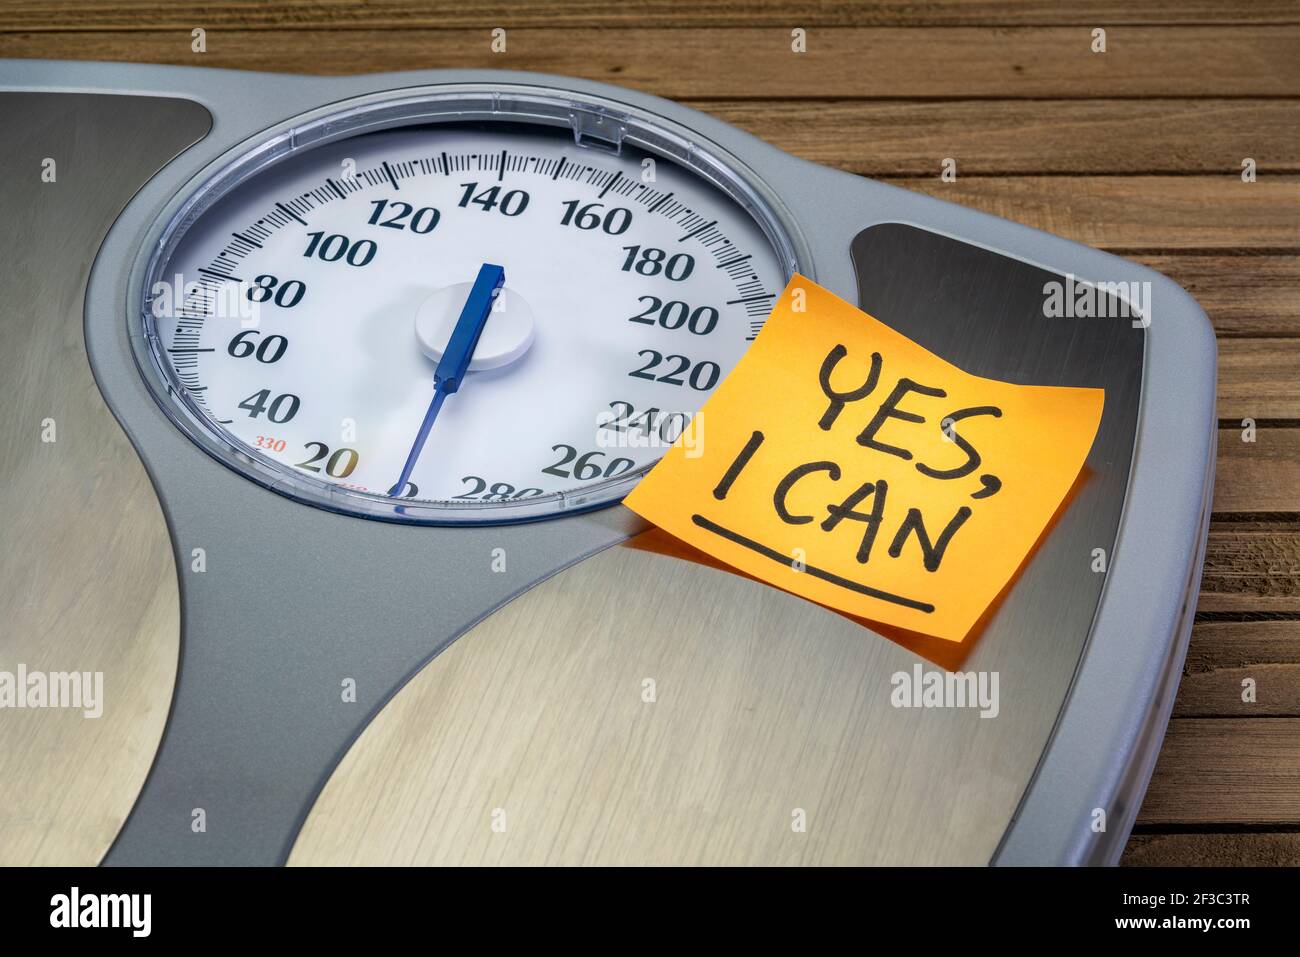 https://c8.alamy.com/comp/2F3C3TR/yes-i-can-motivational-reminder-note-on-a-bathroom-scale-weight-loss-concept-2F3C3TR.jpg